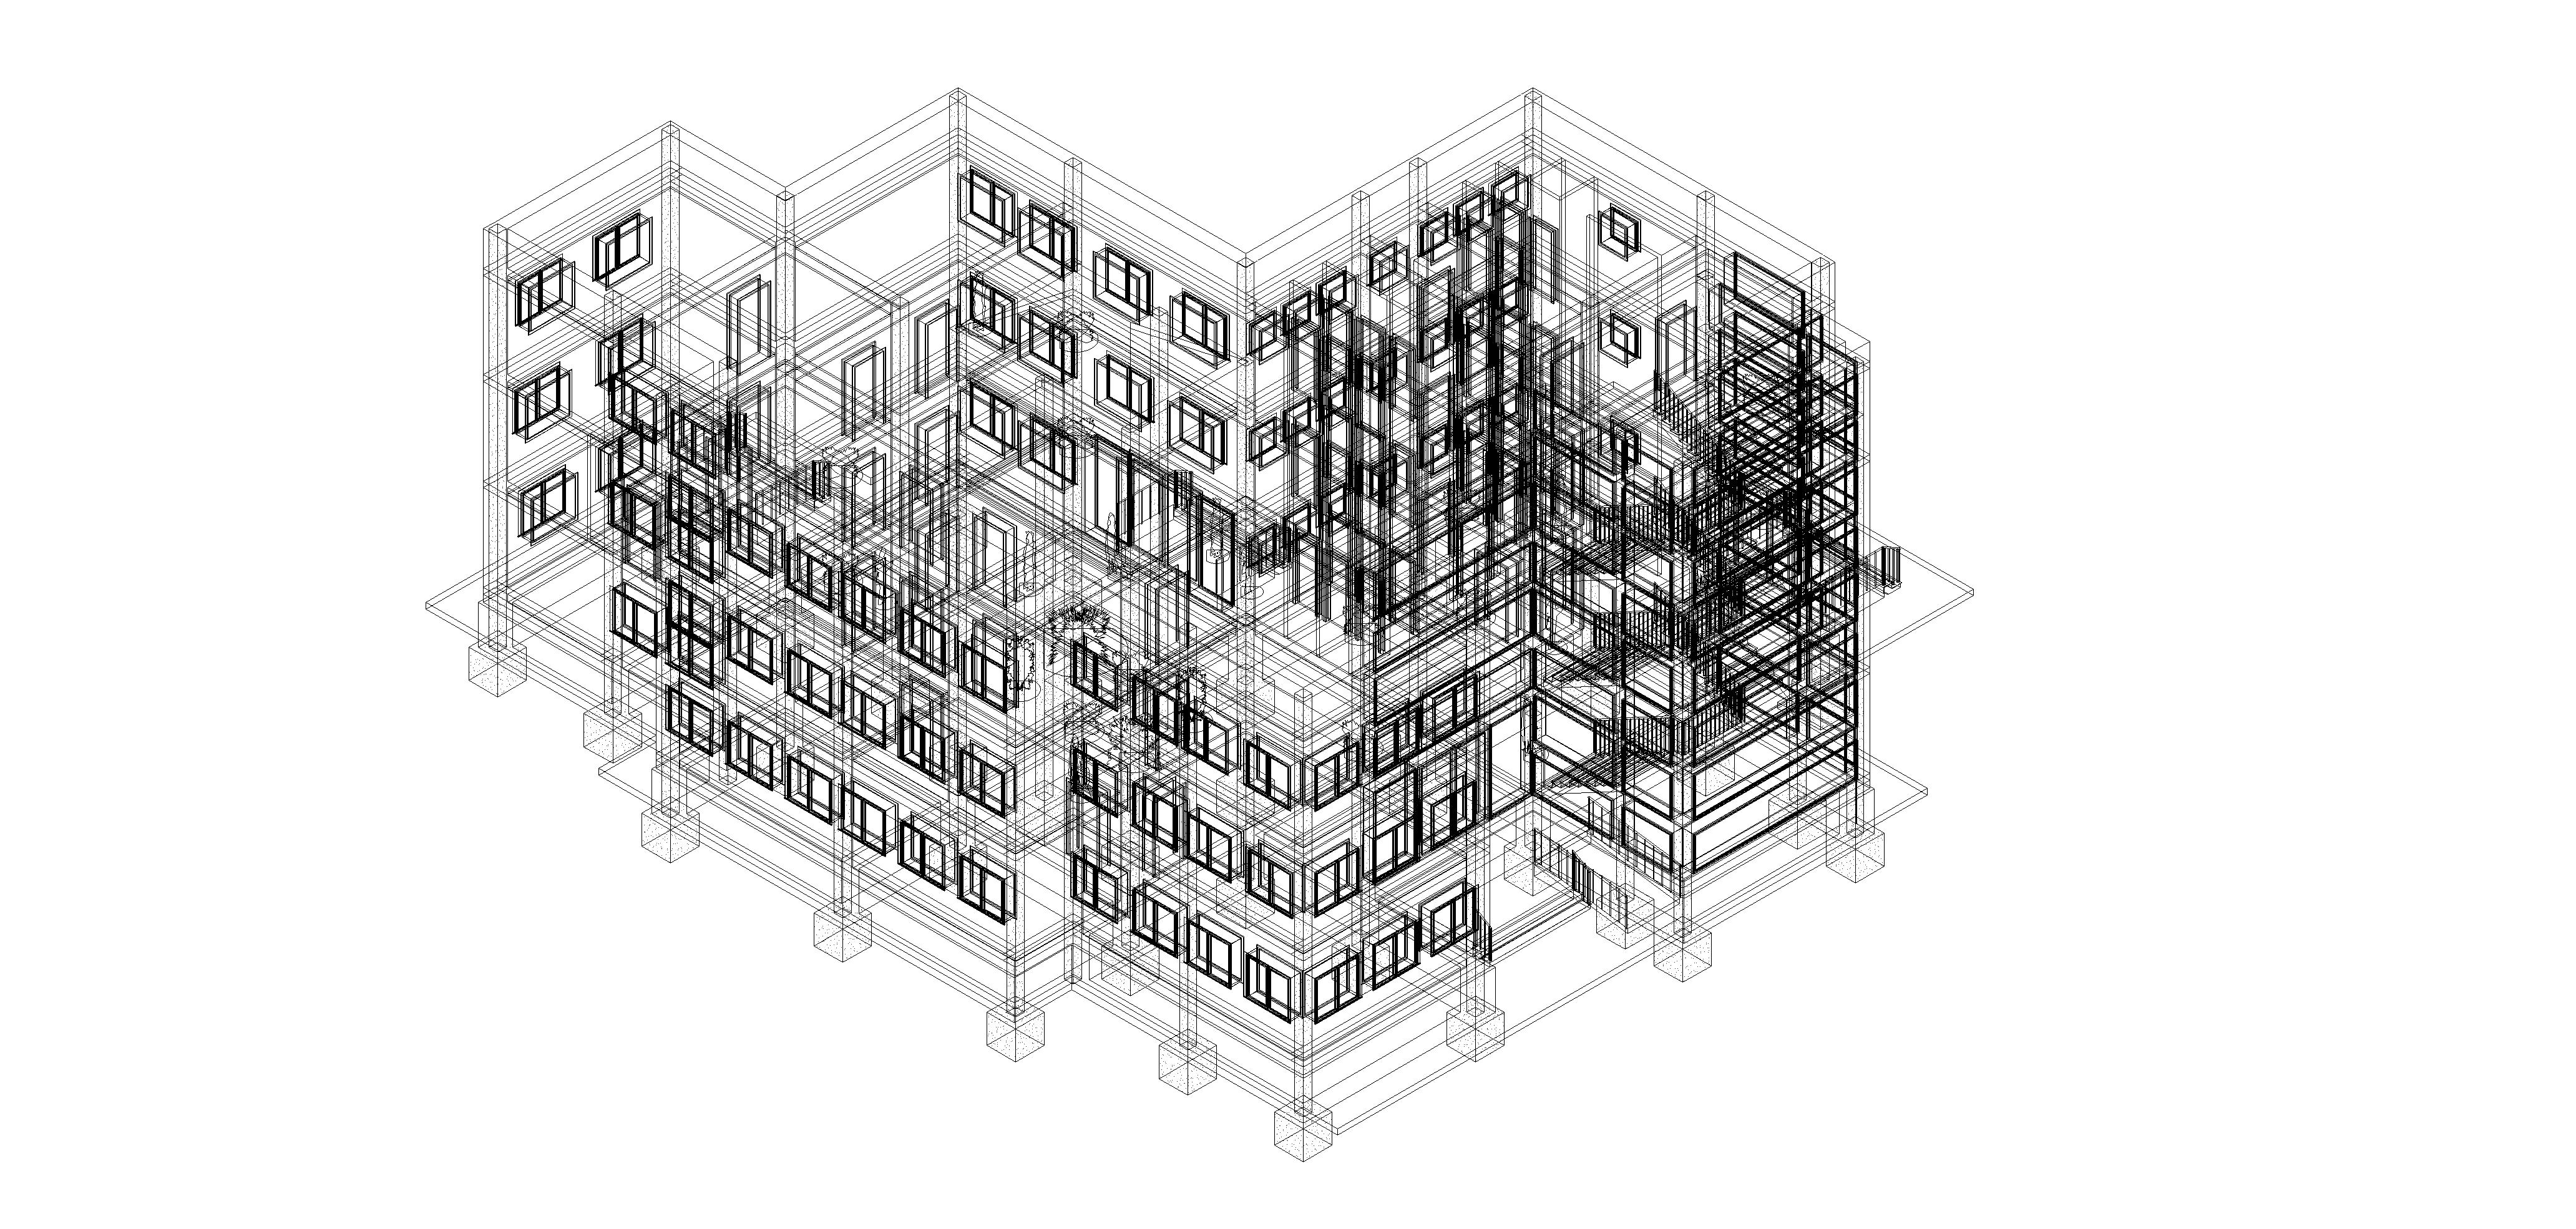 Fire Protection and BIM